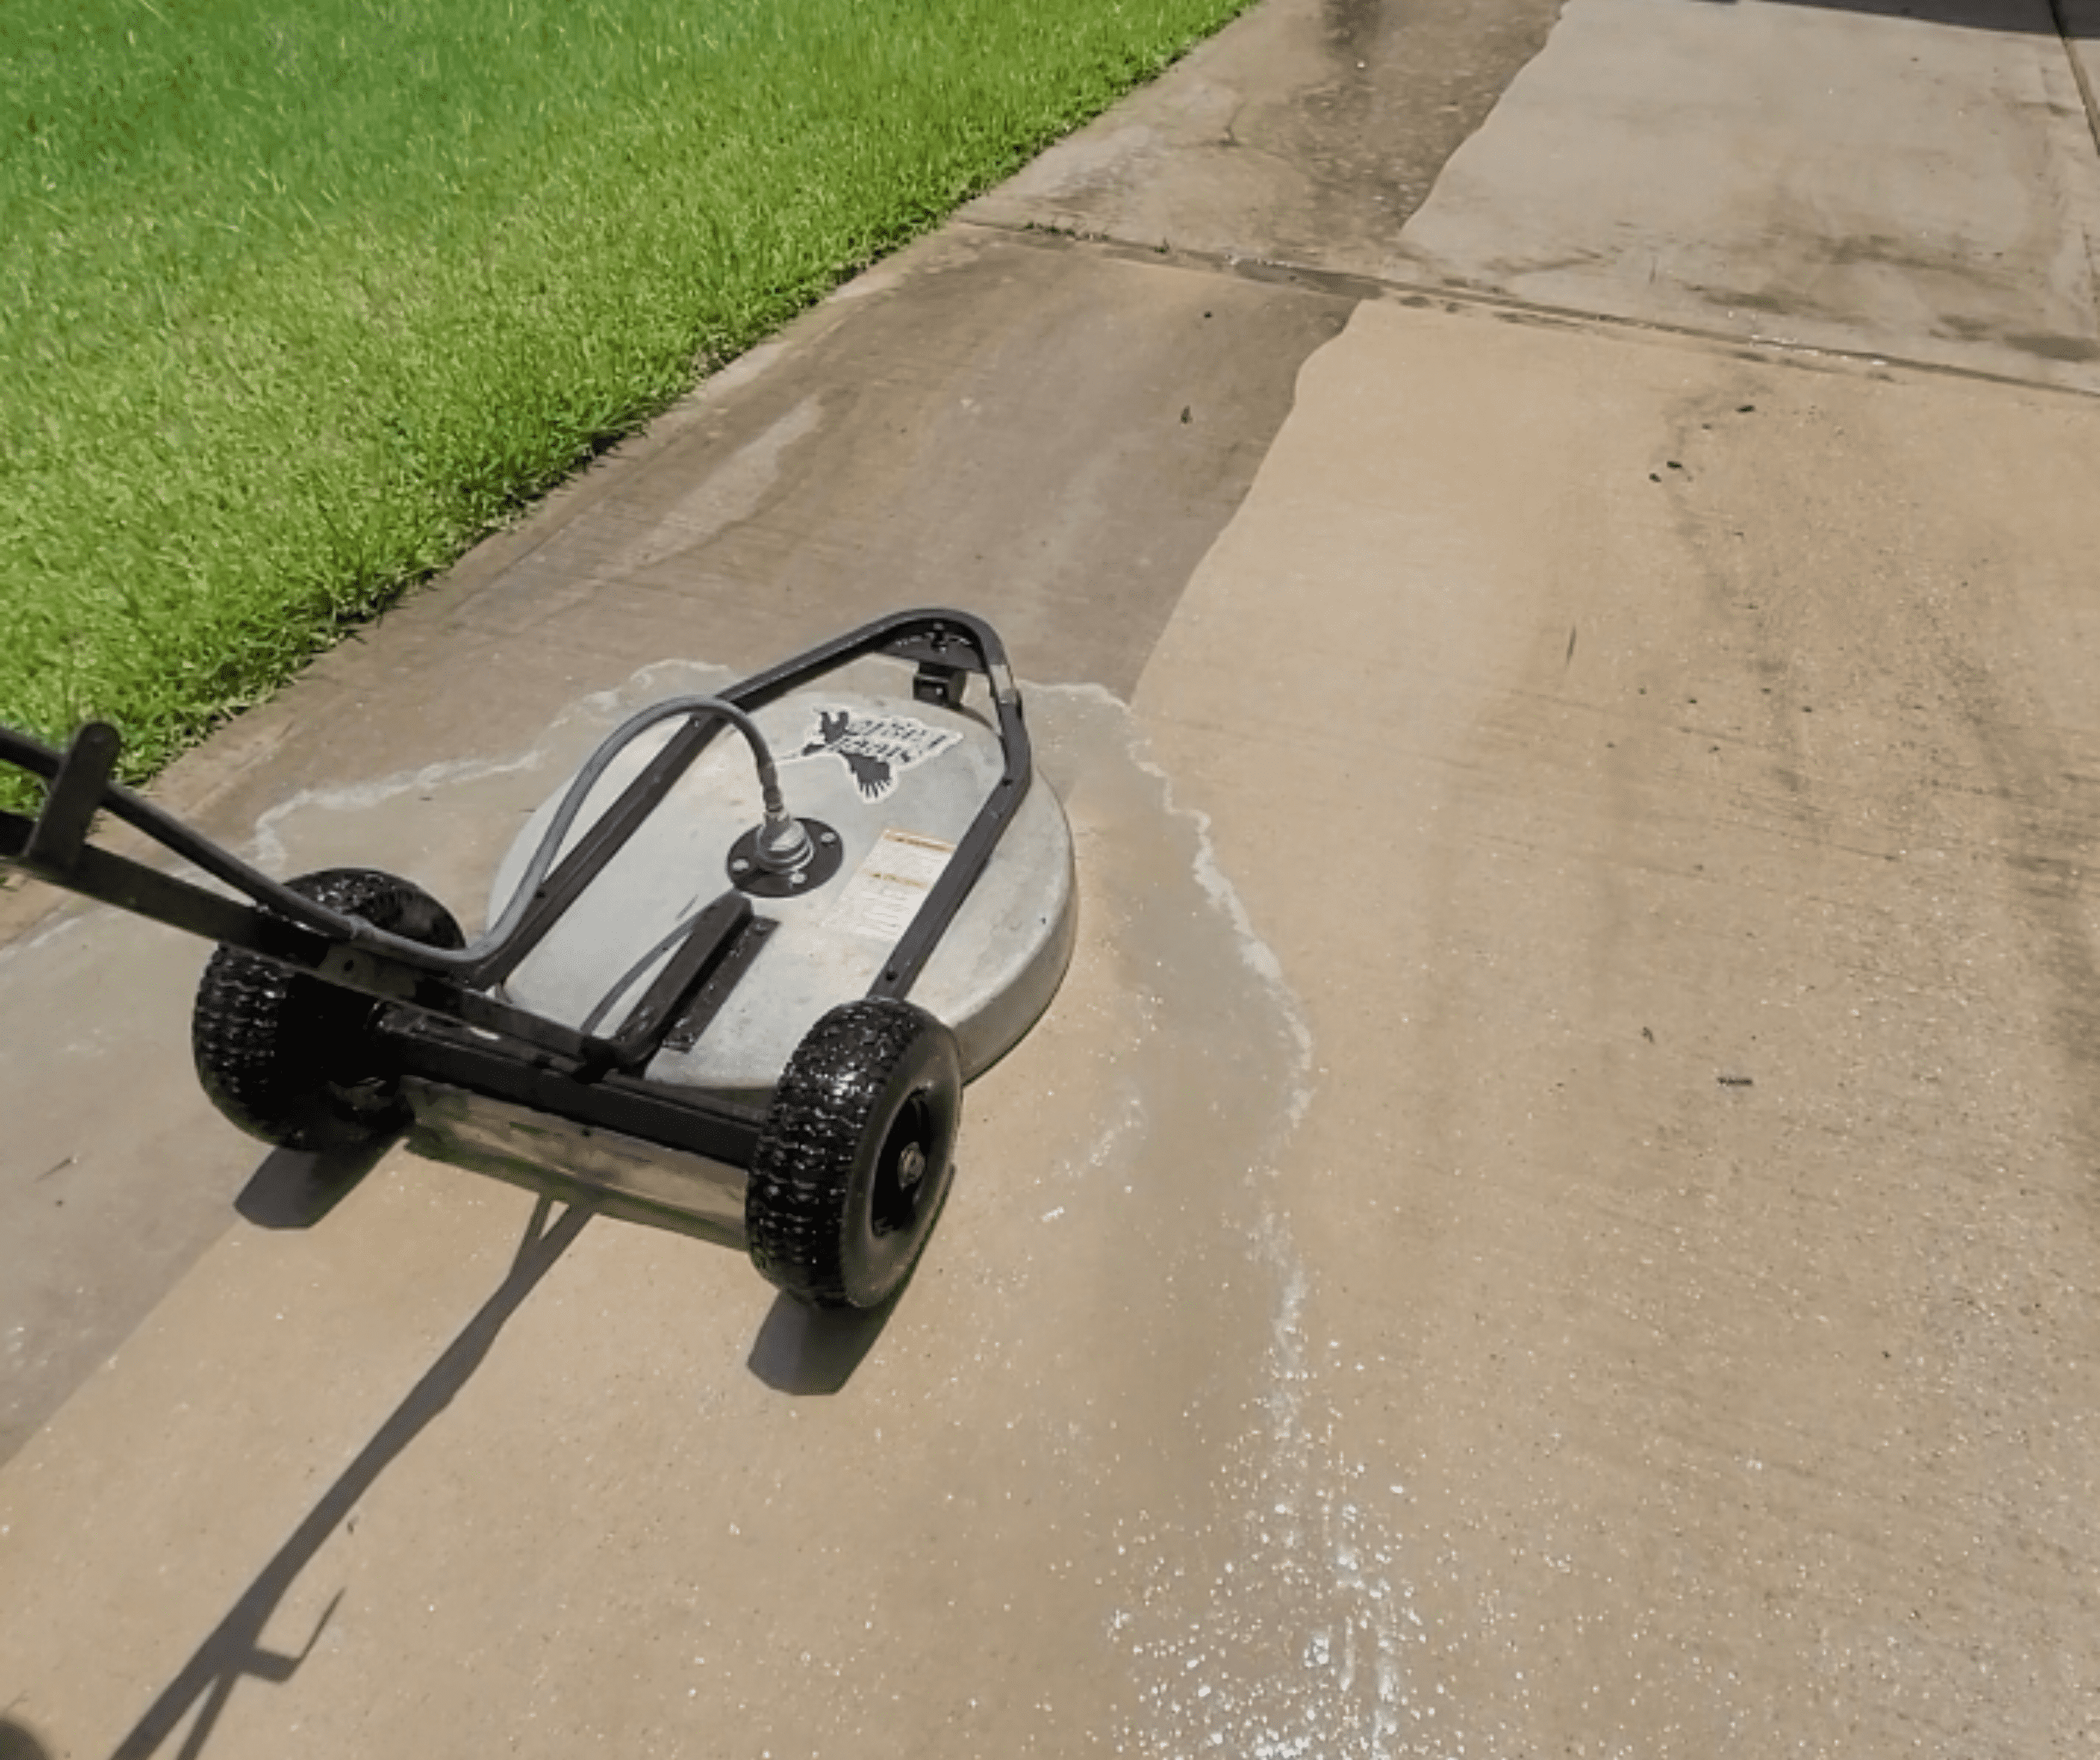 Pressure washing a residential driveway in Houston